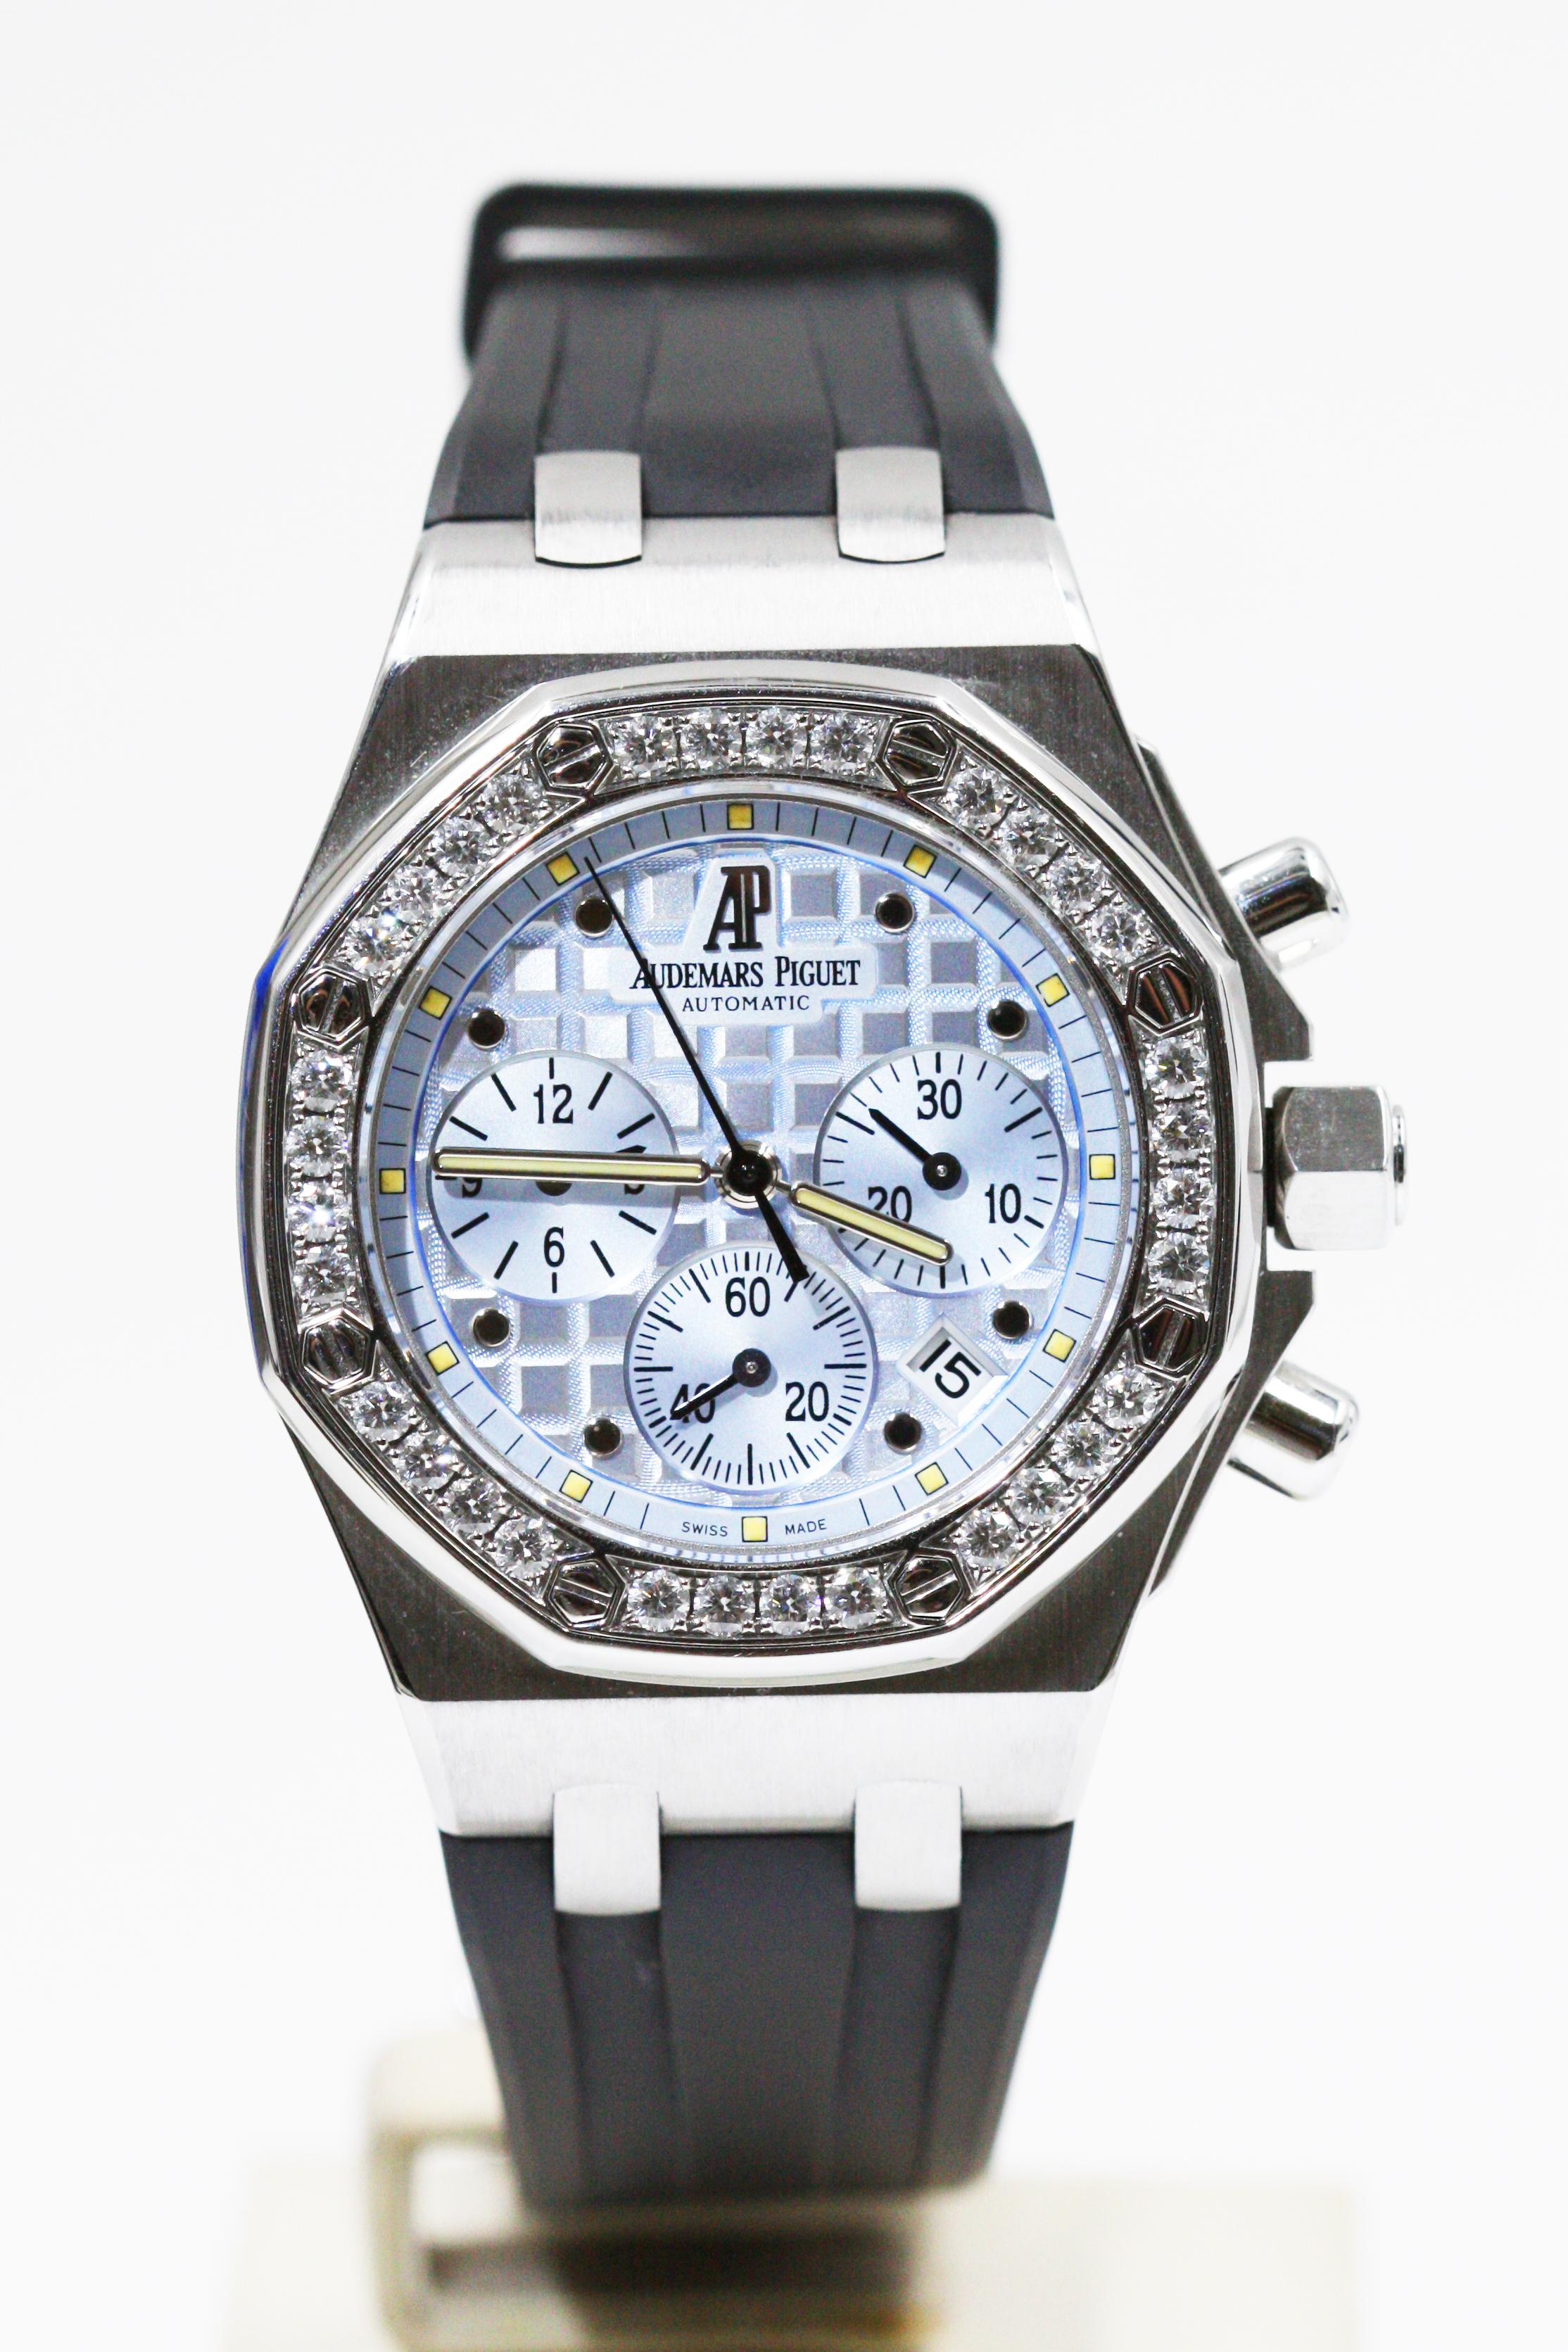 AUDEMARS PIGUET ROYAL OAK OFFSHORE LADY JEANS LIMITED
PARIS BOUTIQUE SPECIAL EDITION

A gorgeous blue limited edition timepiece from Audemars Piguet's Royal Oak Offshore collection- the Lady Jeans wristwatch. The watch's case is made of stainless